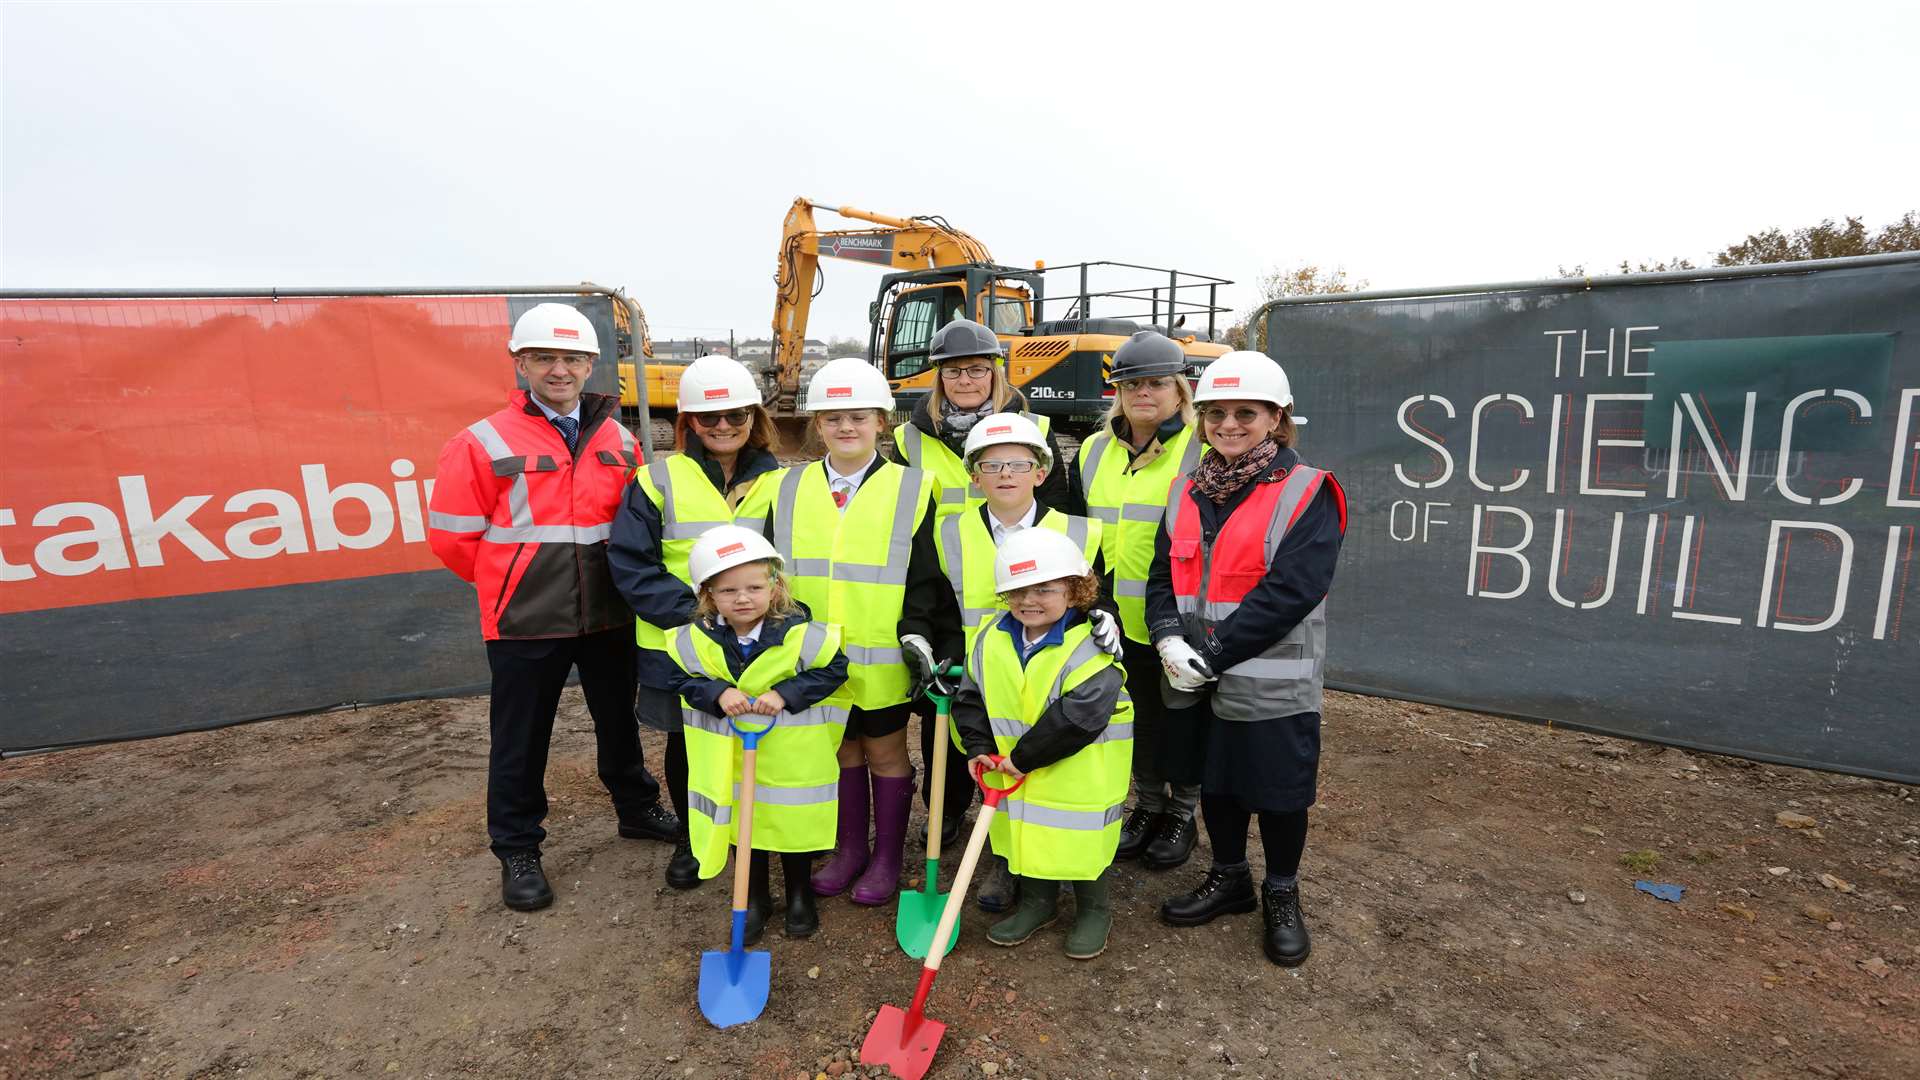 Priory Fields Primary School in Dover will have a new building.